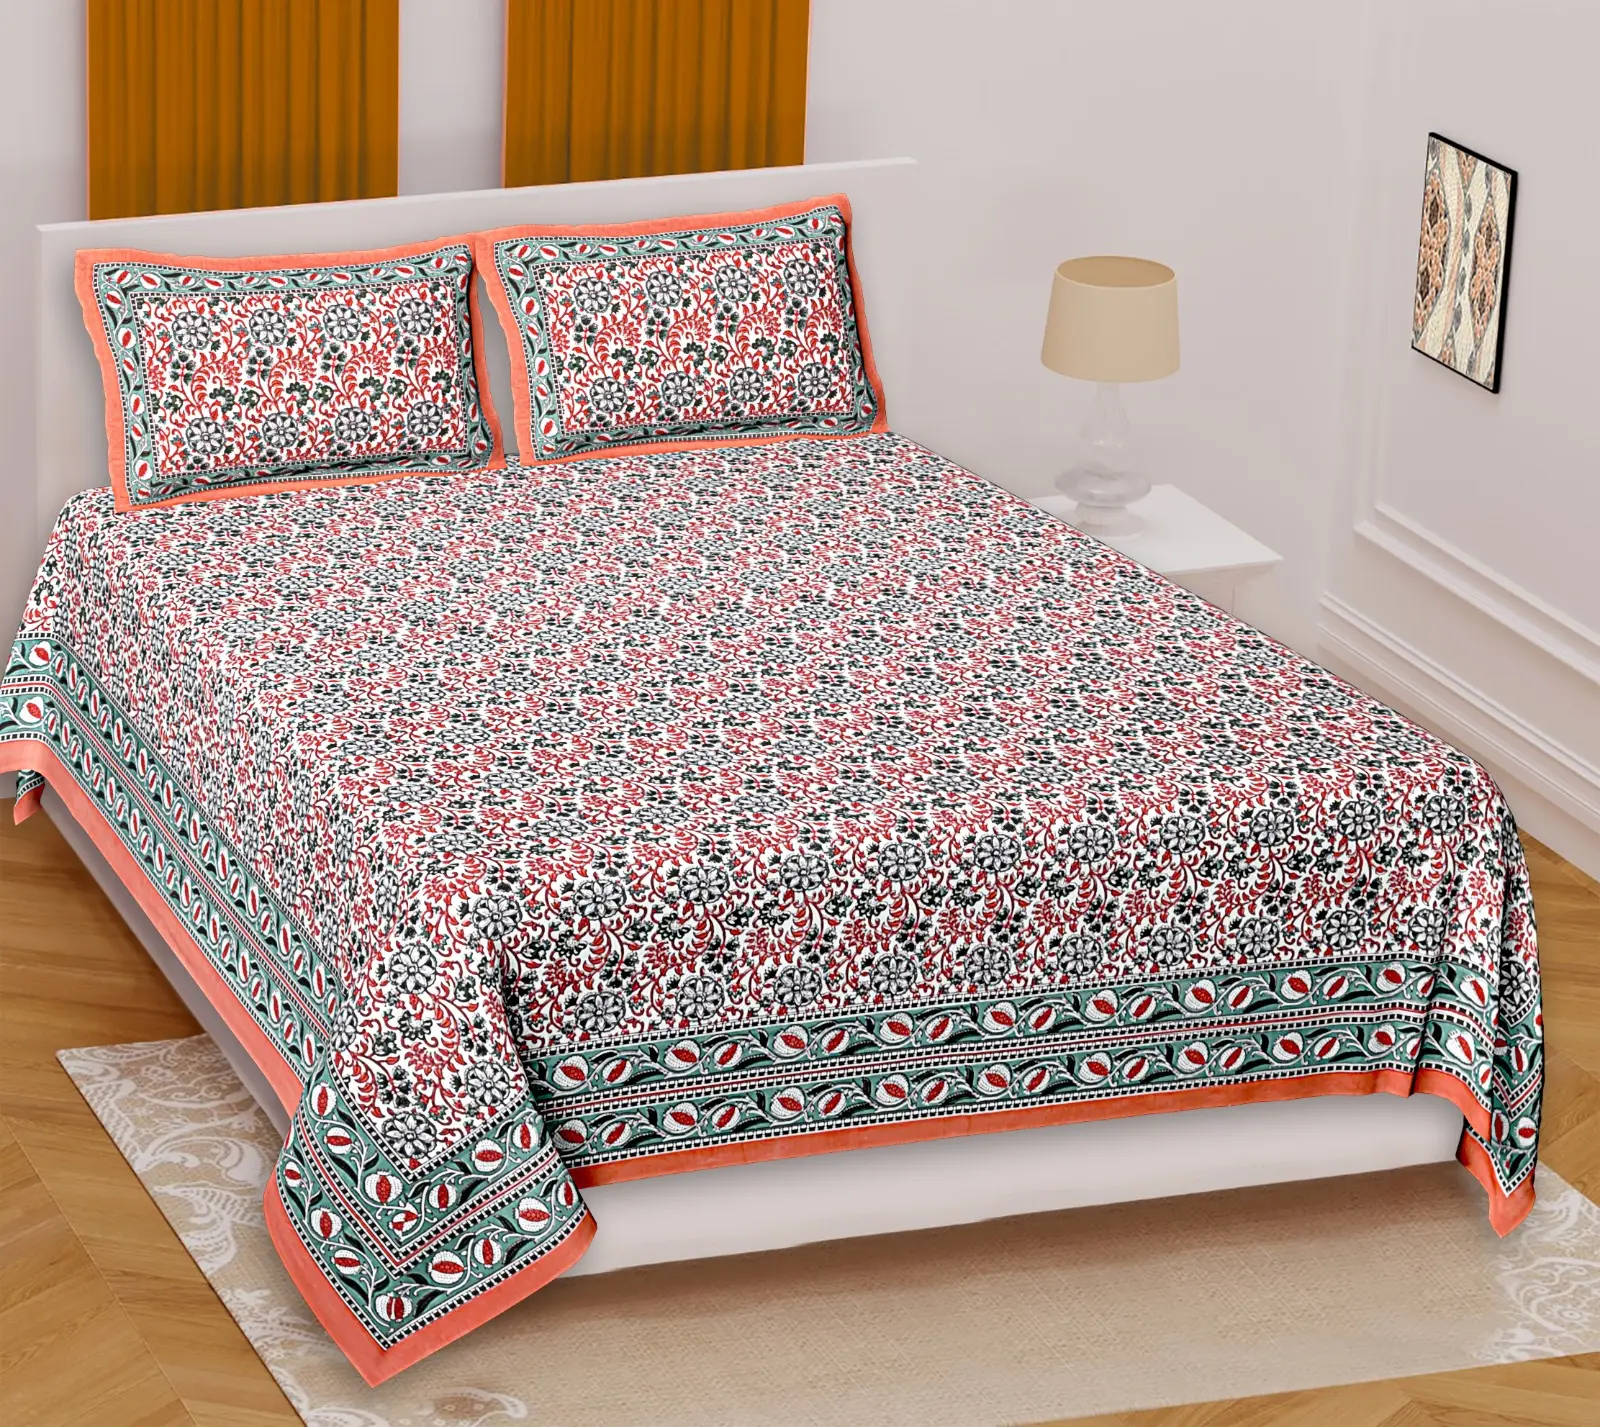 Bedding Set with Comforter Bed Sheet King Size Bedsheets Luxury Colorful Floral Pattern Embroidered Bed Cover